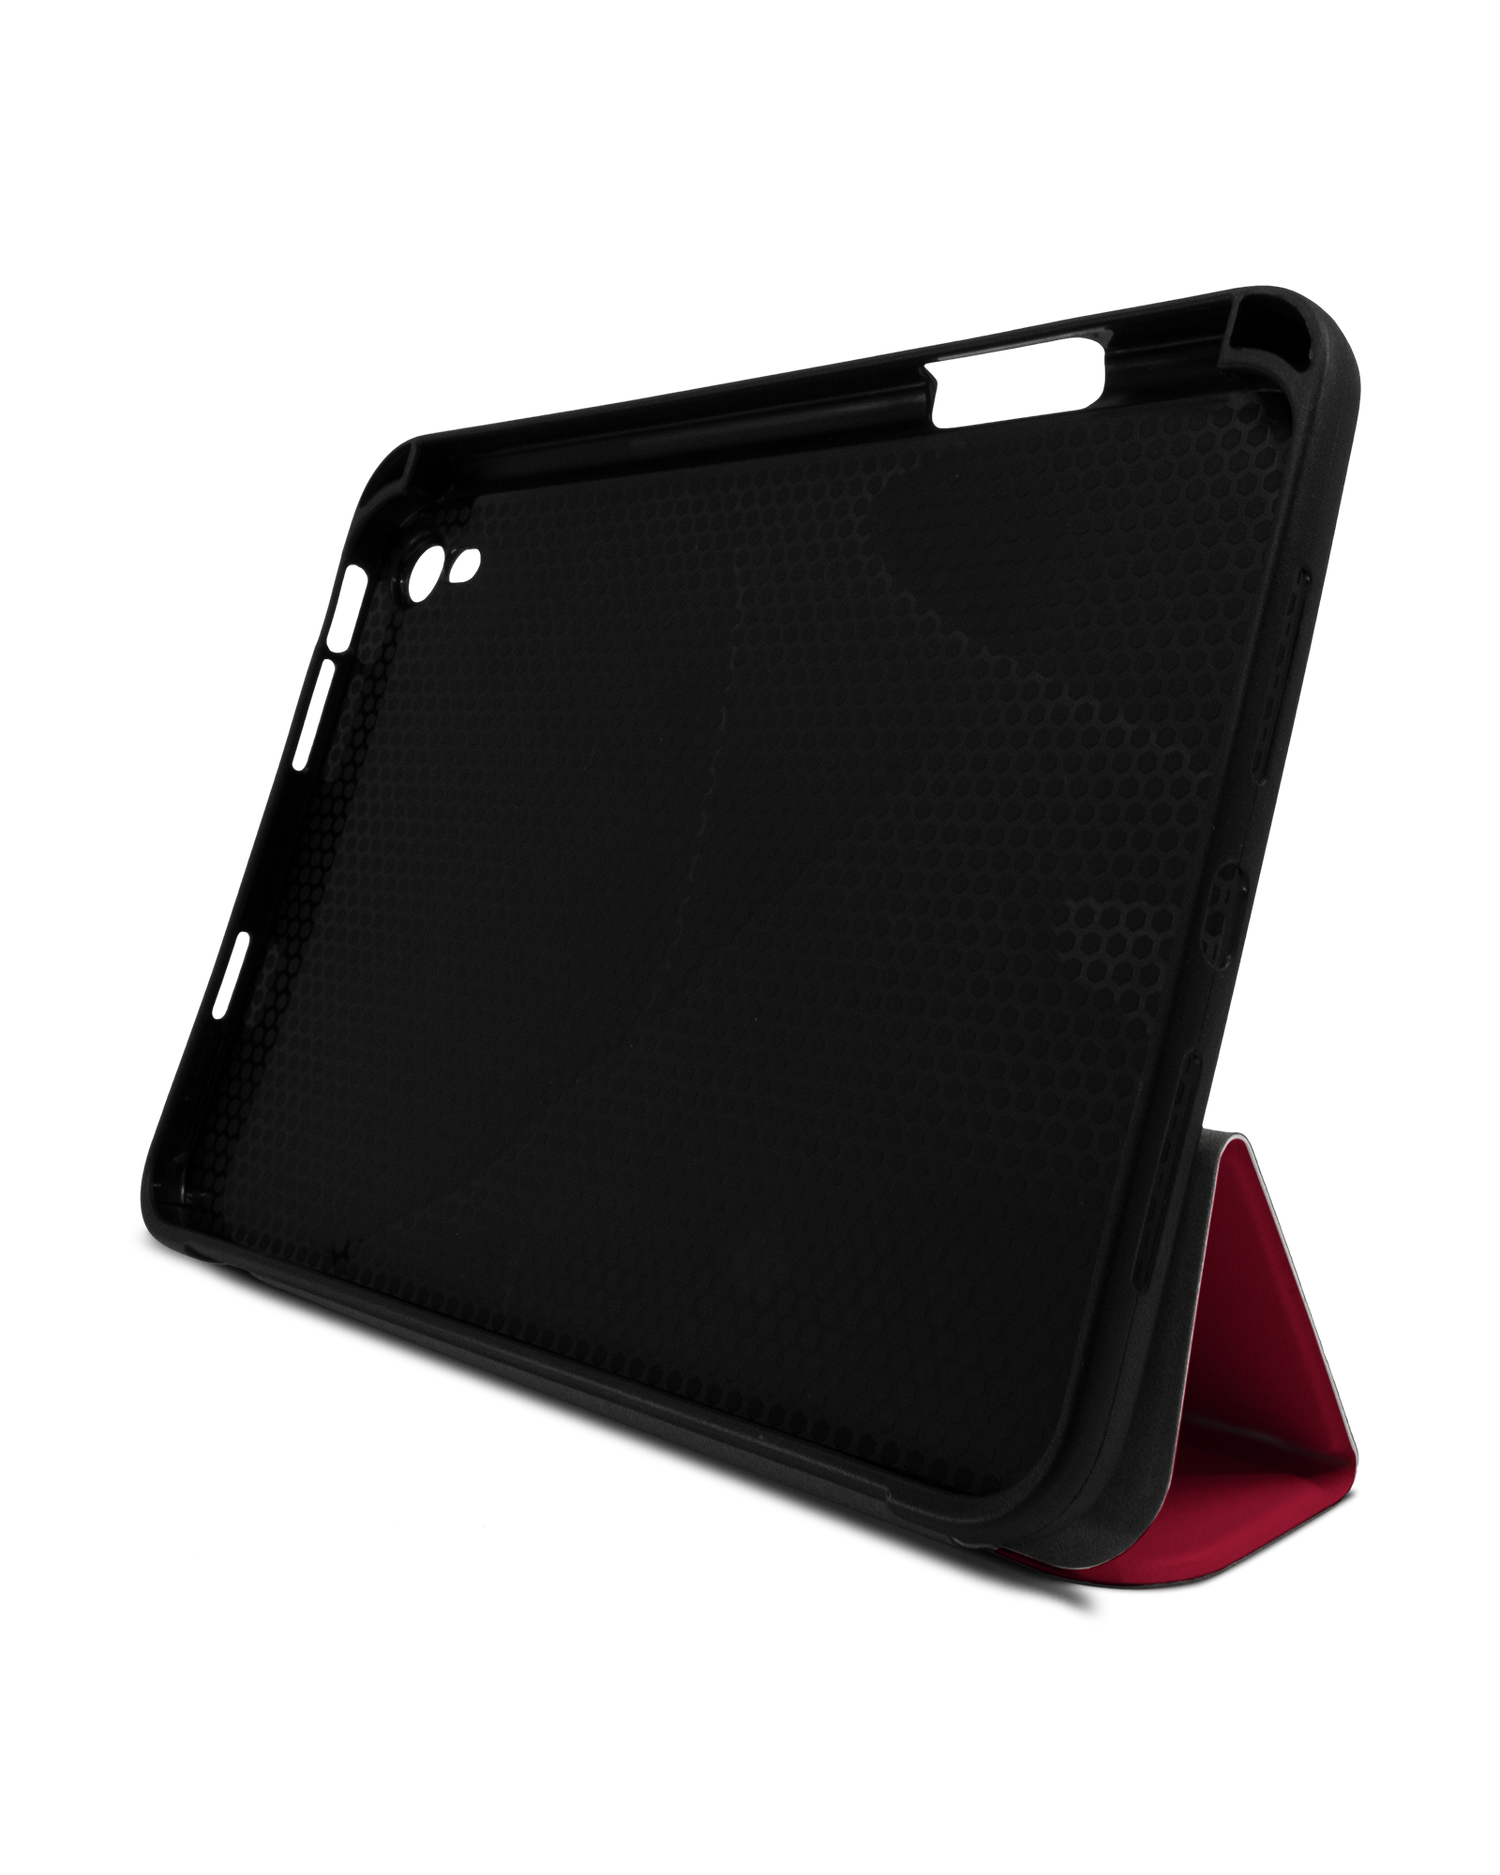 RED iPad Case with Pencil Holder Apple iPad mini 6 (2021): Set up in landscape format (front view)